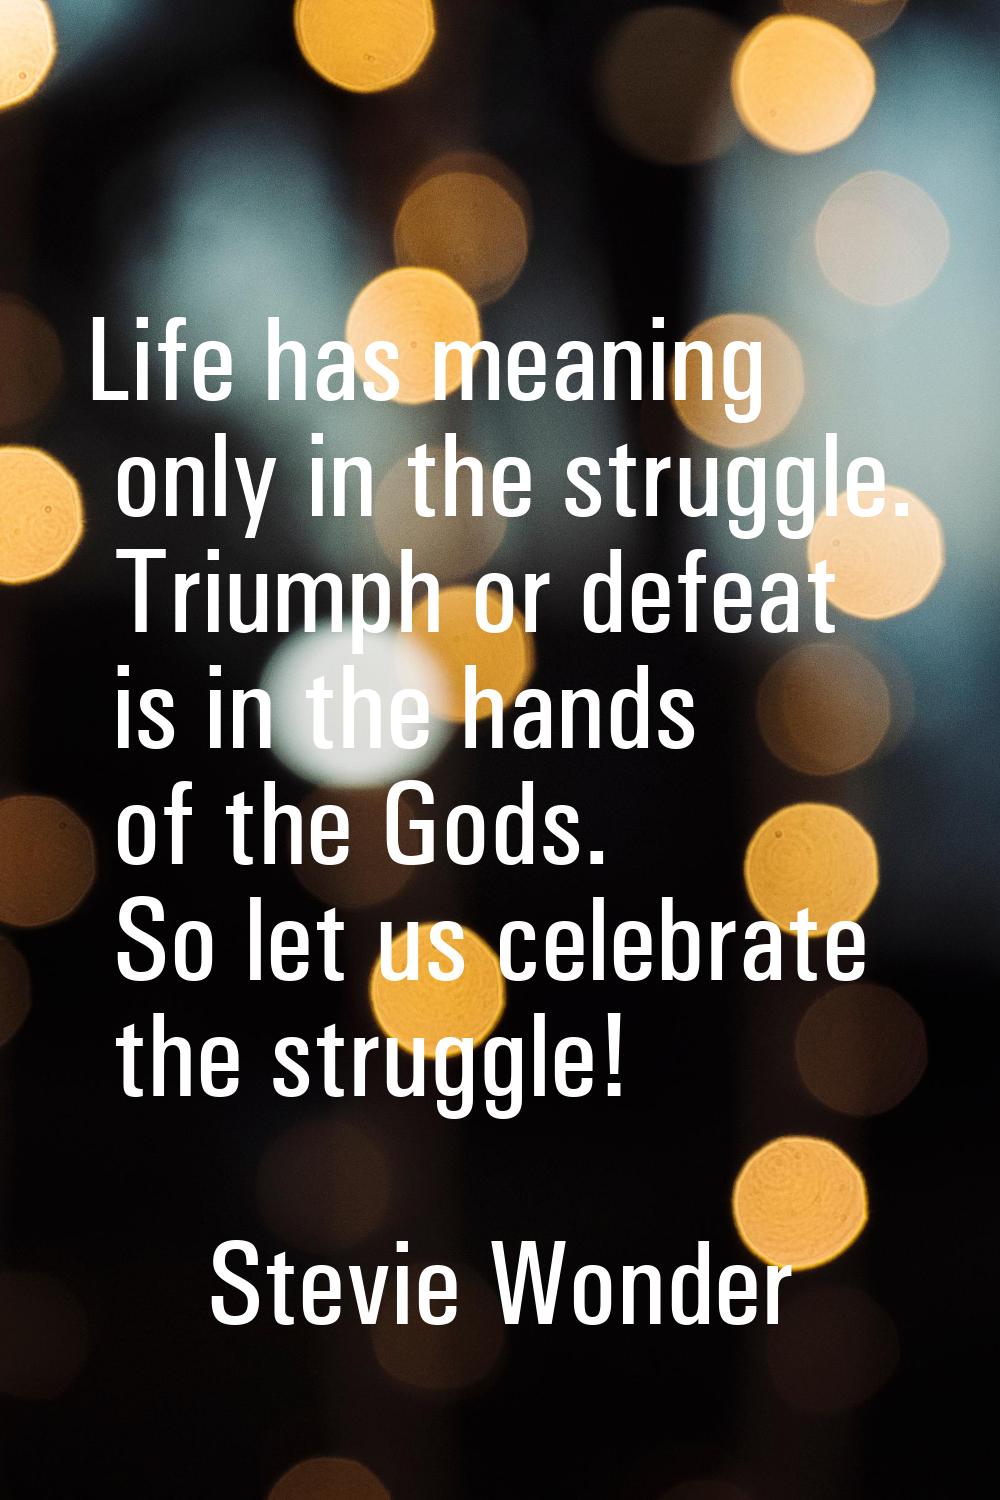 Life has meaning only in the struggle. Triumph or defeat is in the hands of the Gods. So let us cel